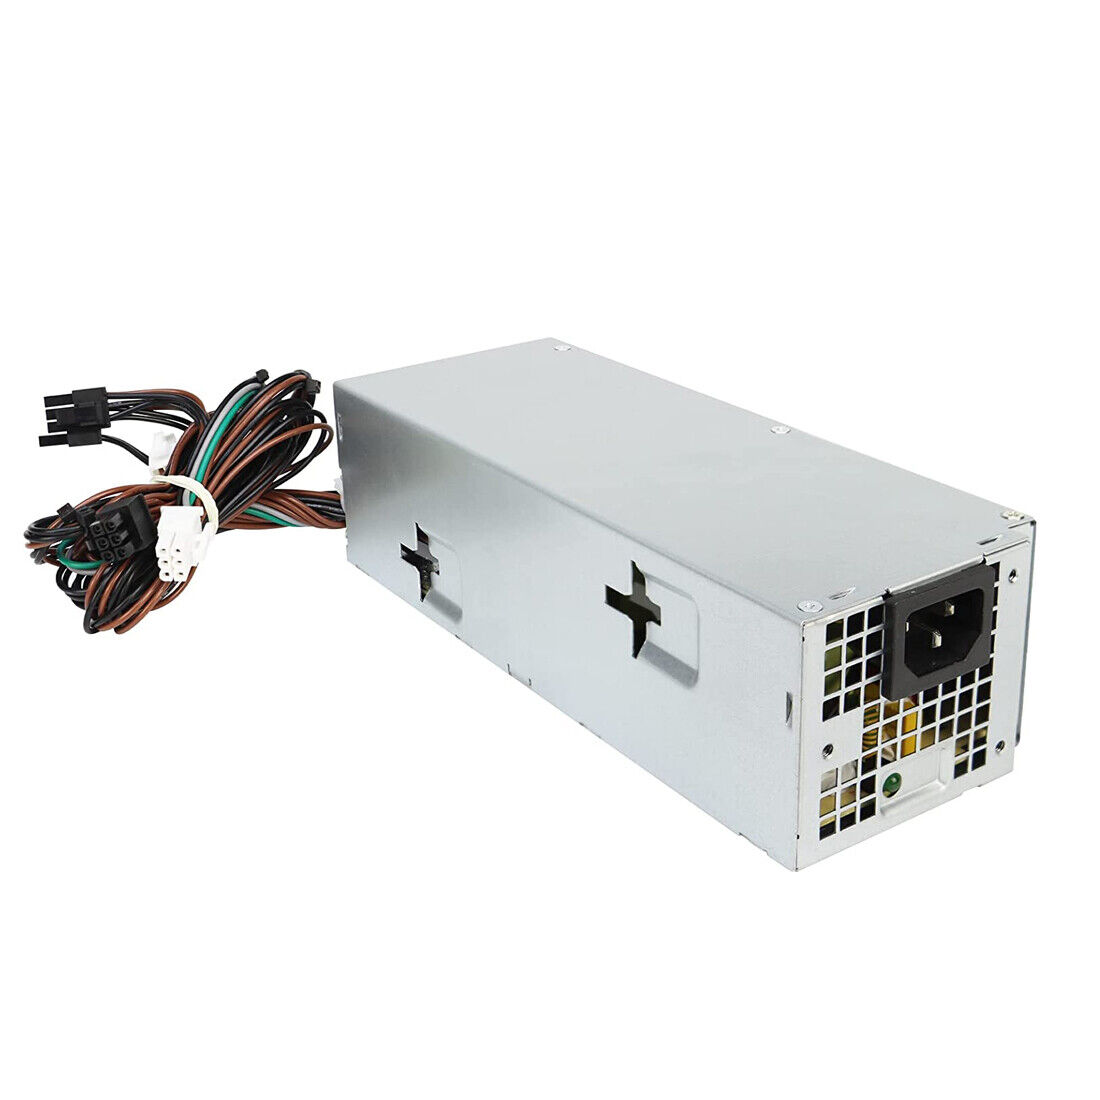 Nw 4FWF7 460W PSU Power Supply Fors Dell XPS 8940 MT 04FWF7 H460EGM-00 D460E001P